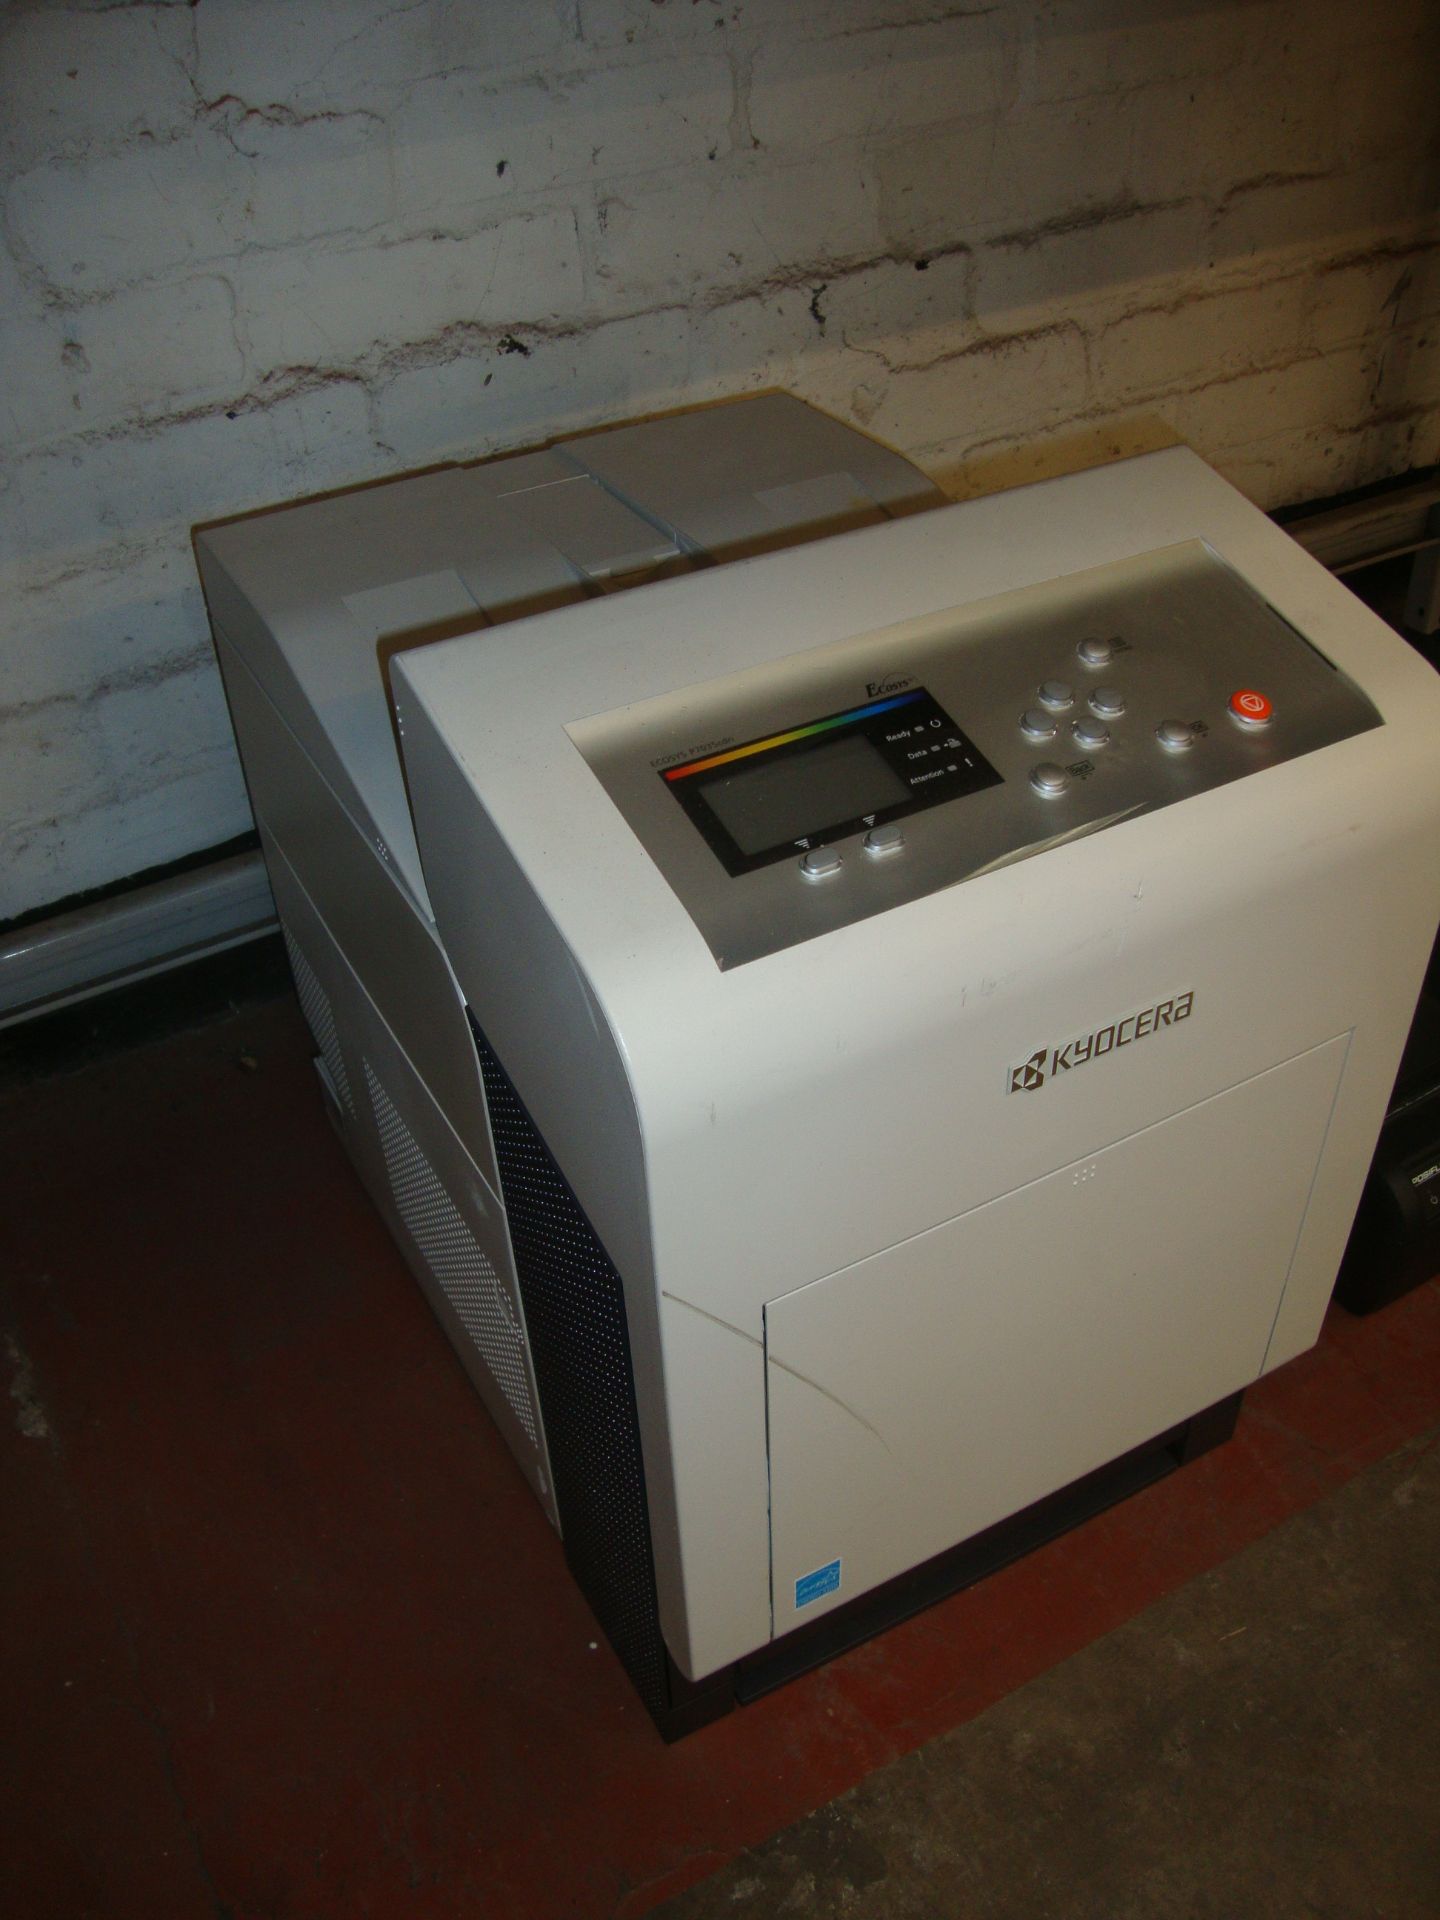 2 off Kyocera model FS-C5400DN 35 page per minute colour laser printers. Up to 9,600 DPI printing - Image 3 of 4